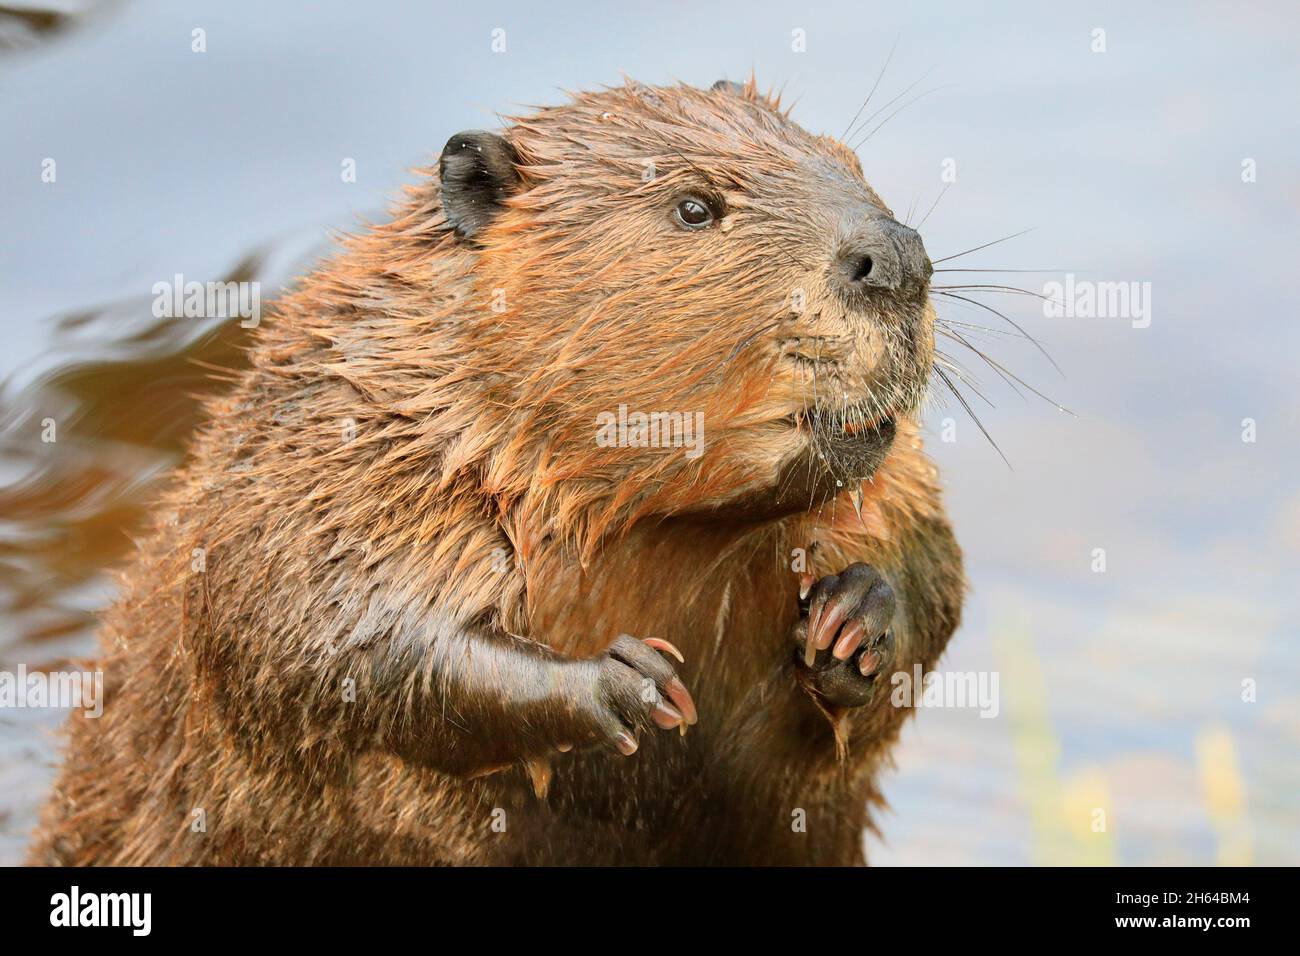 A close-up portrait view of a North American beaver, Quebec, Canada Stock Photo